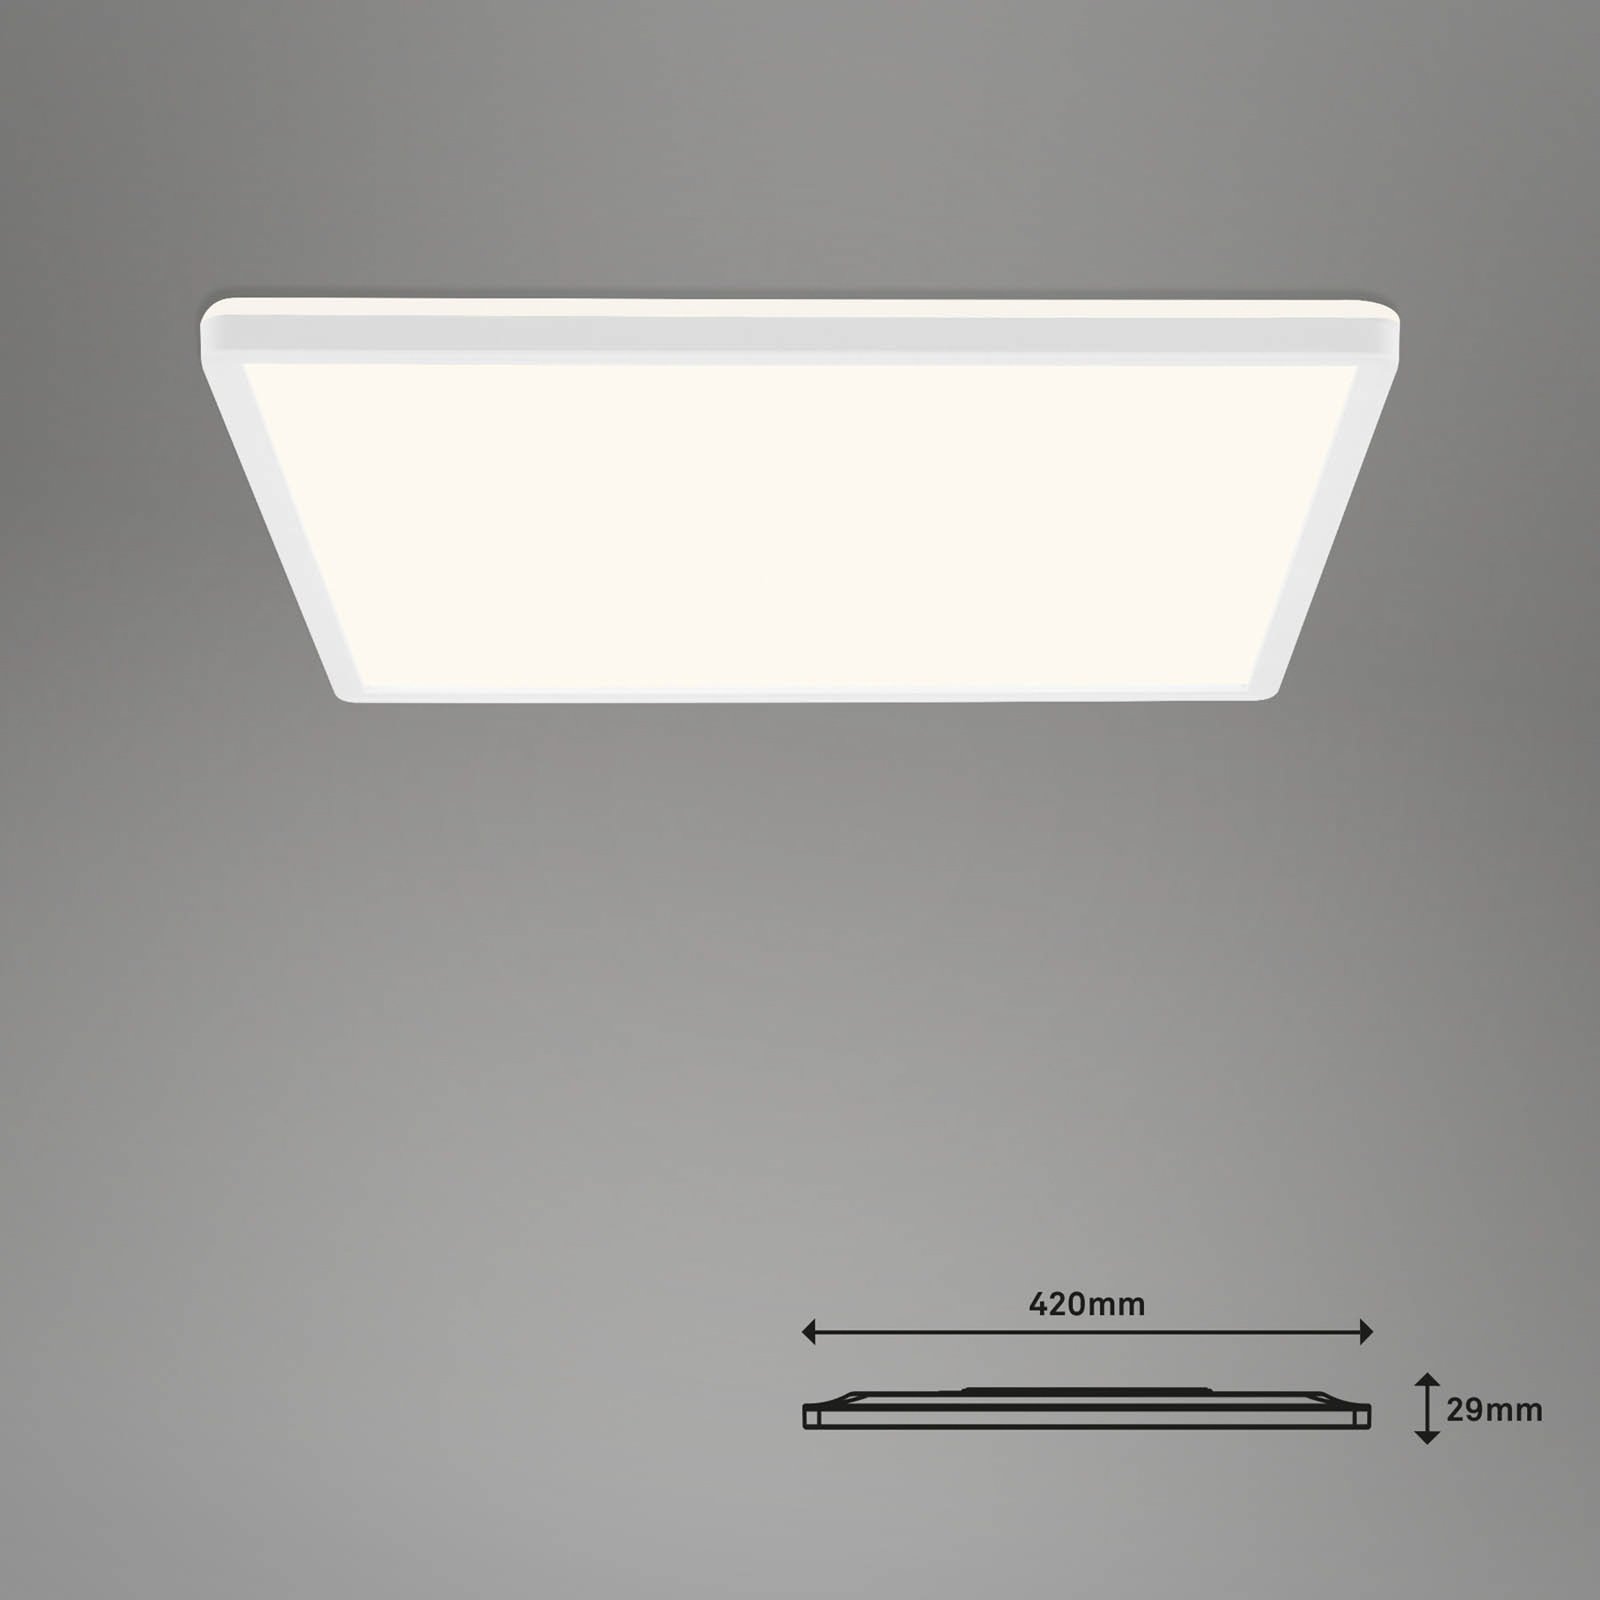 LED ceiling lamp Slim S dimmable CCT white 42x42cm